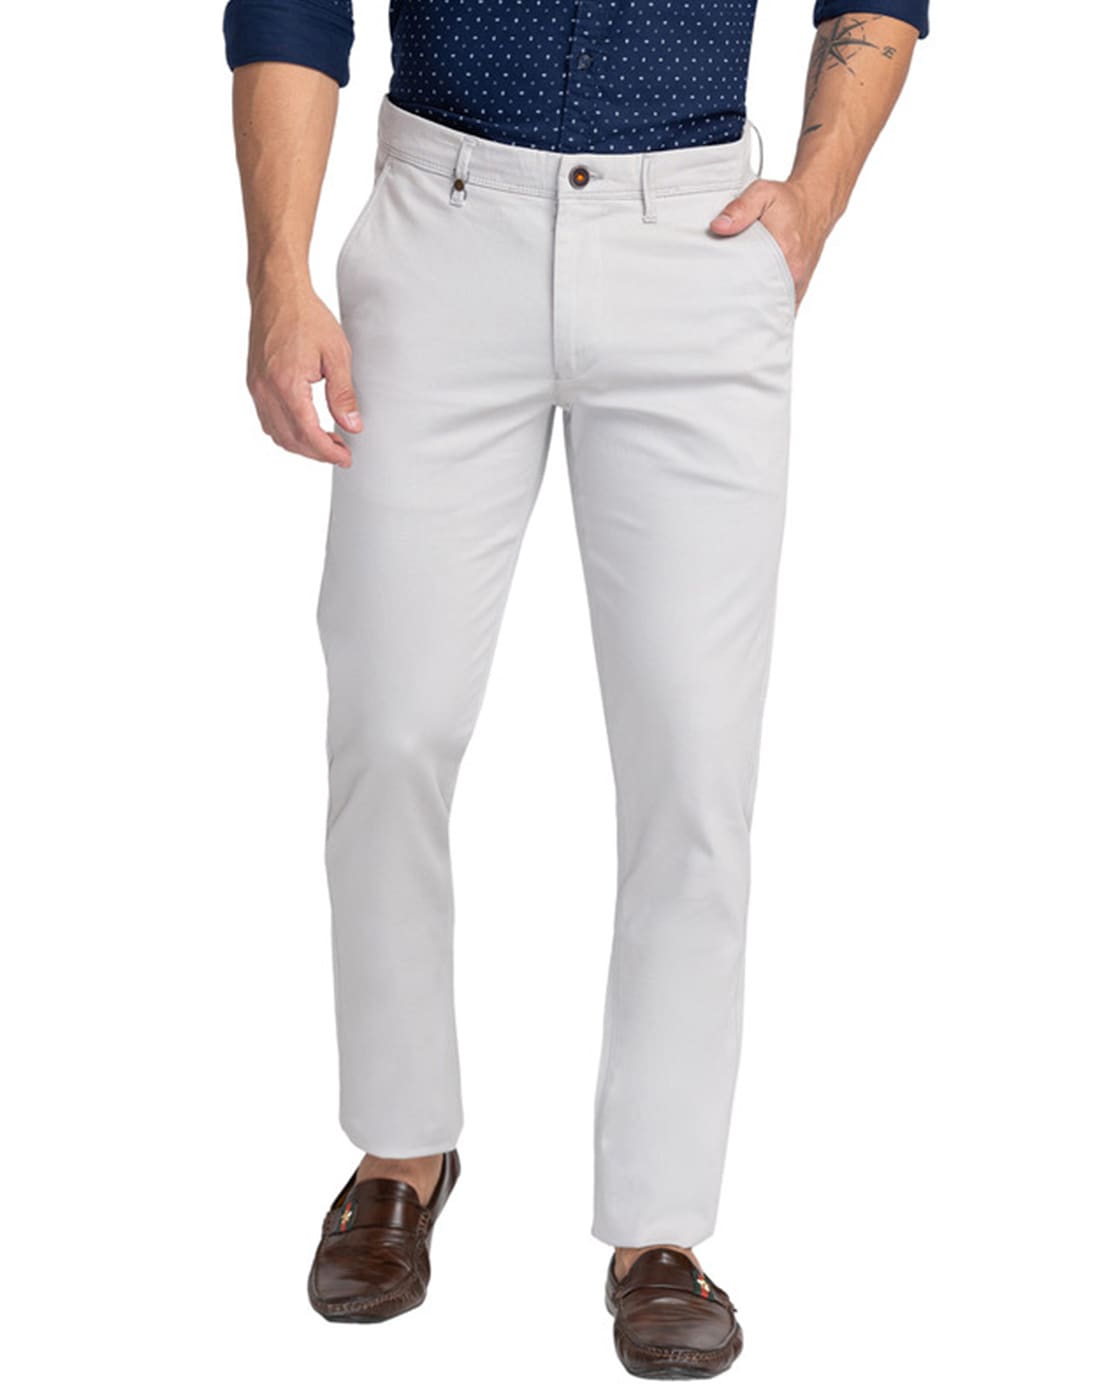 Buy Navy Trousers & Pants for Men by OXEMBERG Online | Ajio.com